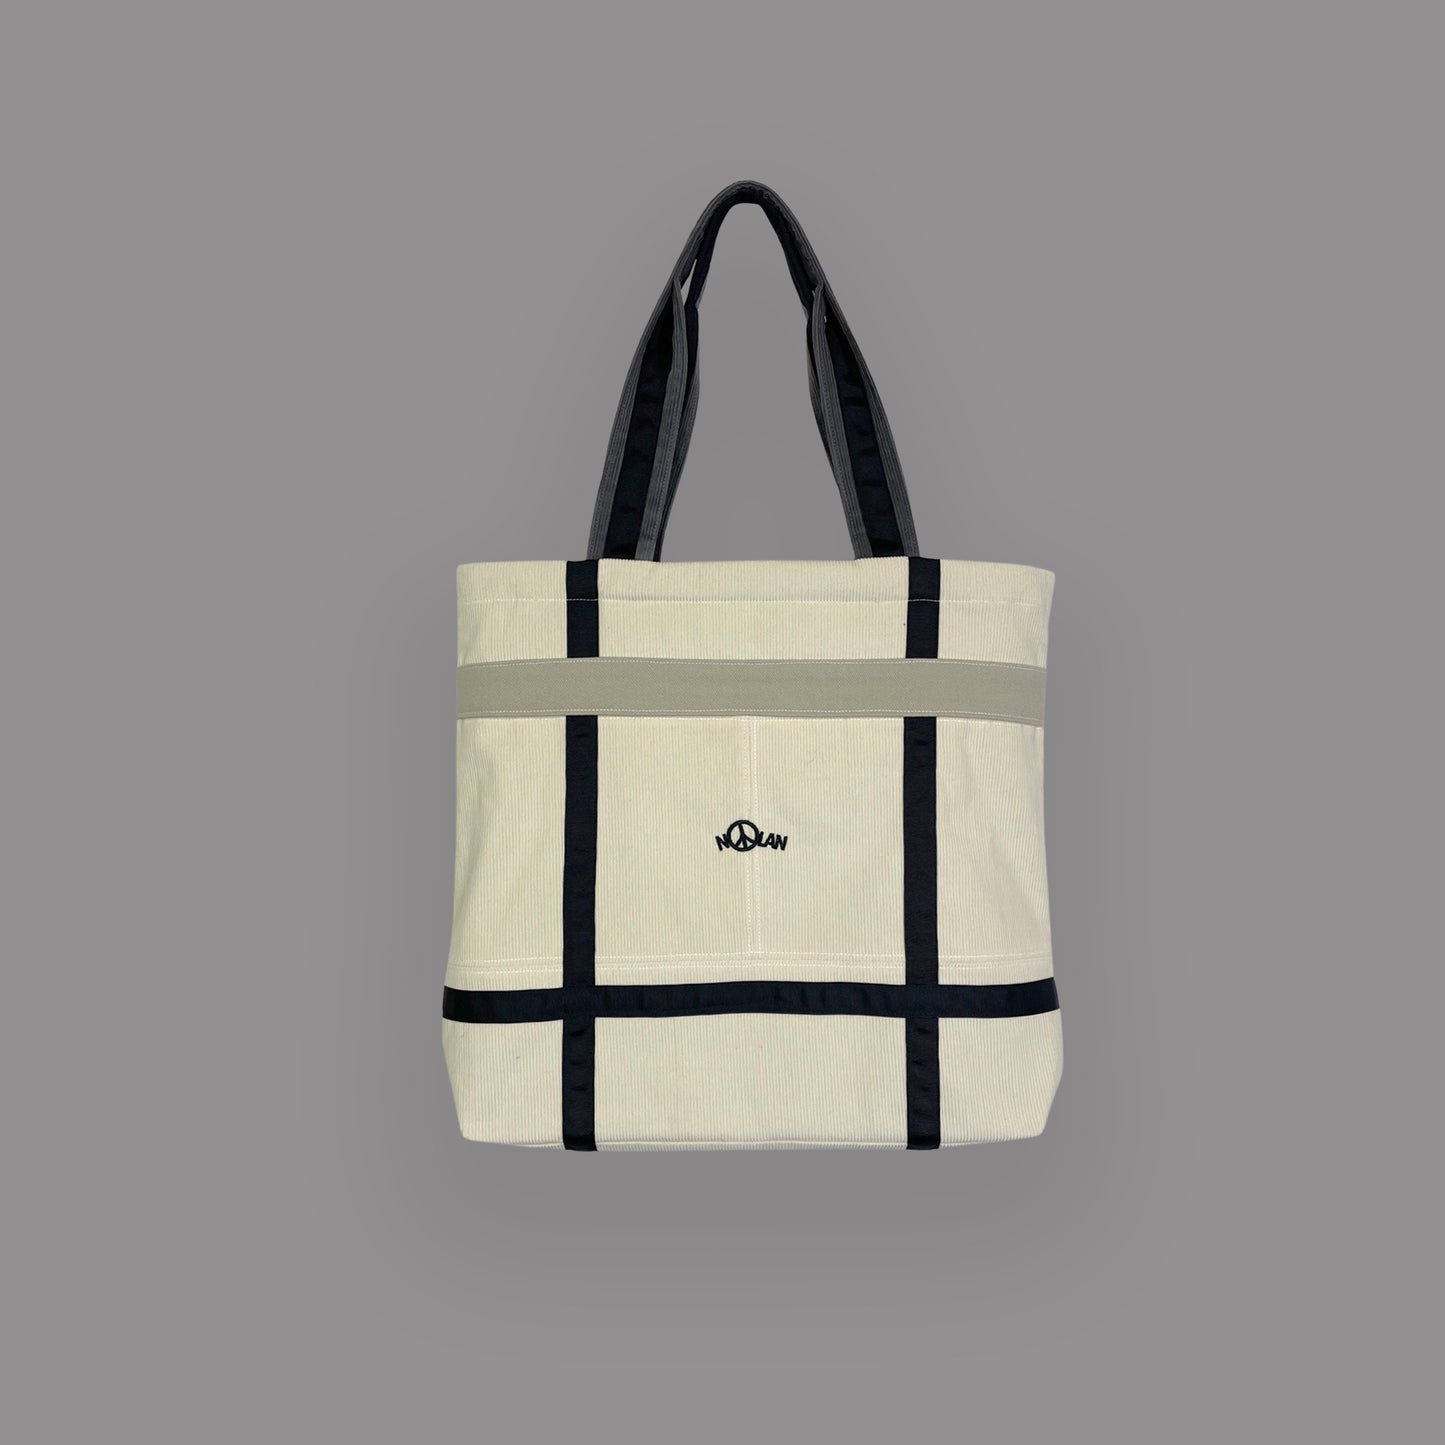 Save the REEF Tote